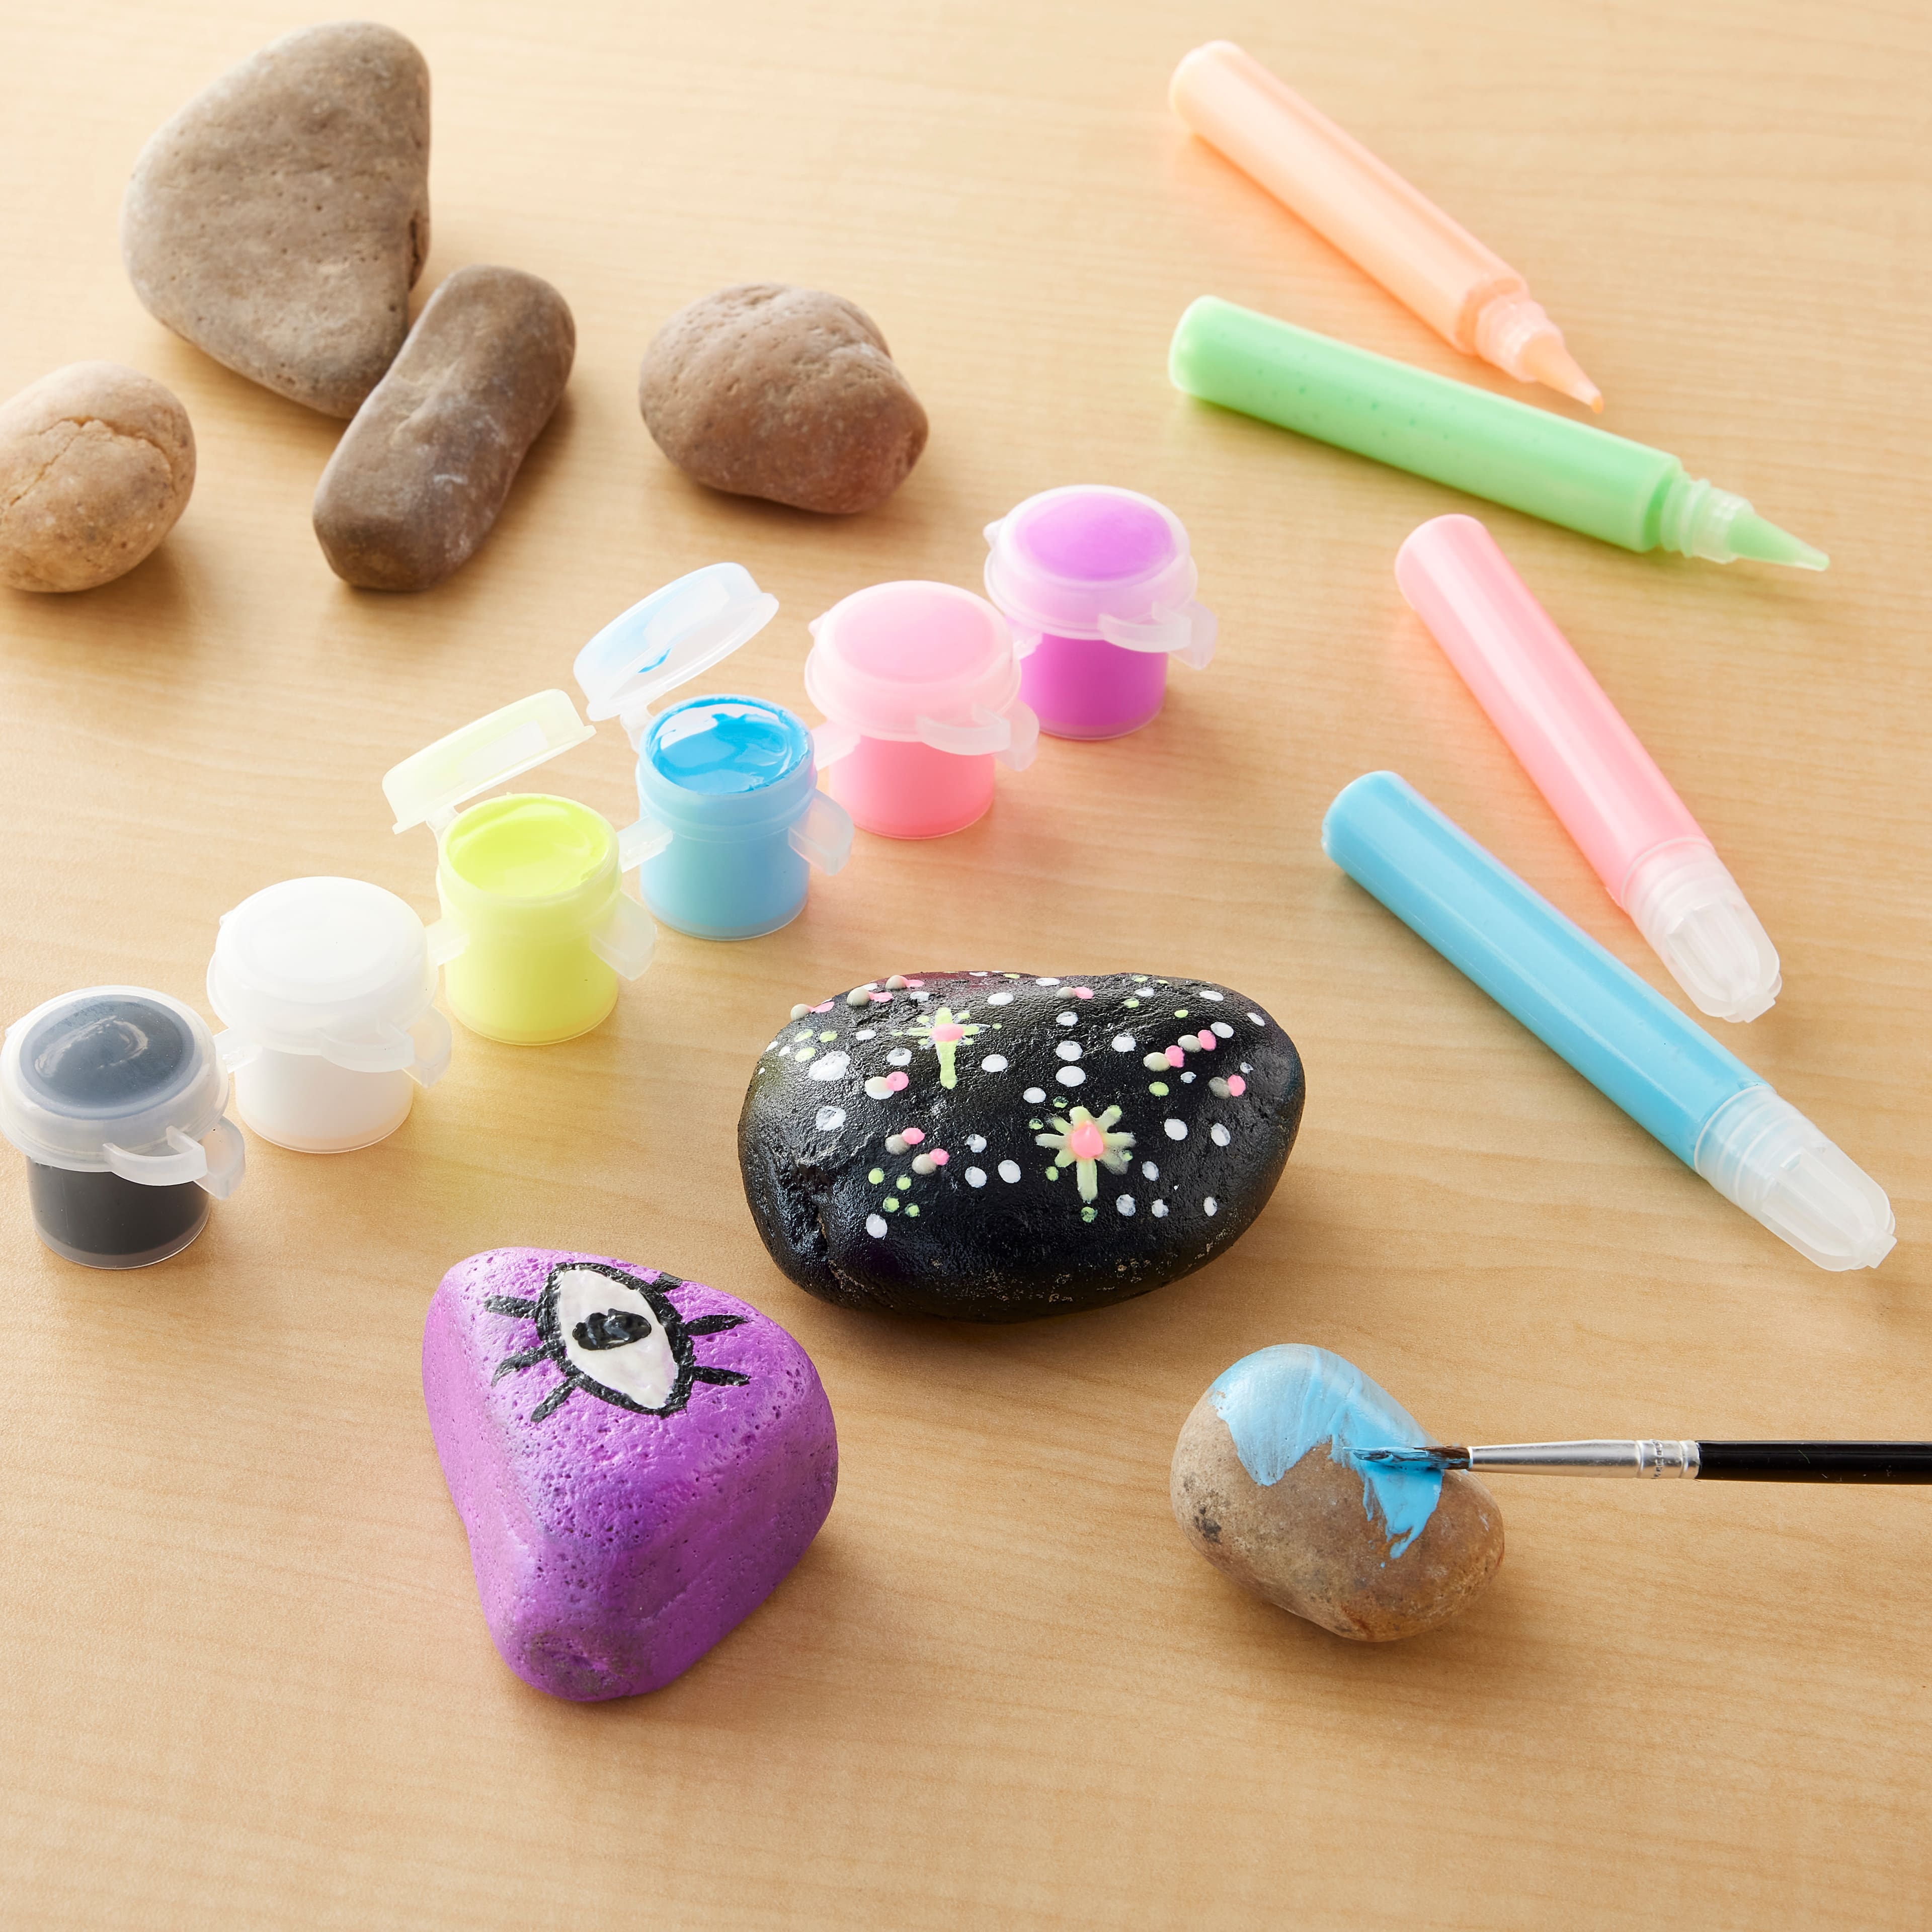 Faber-Castell Glow in the Dark Rock Painting Kit